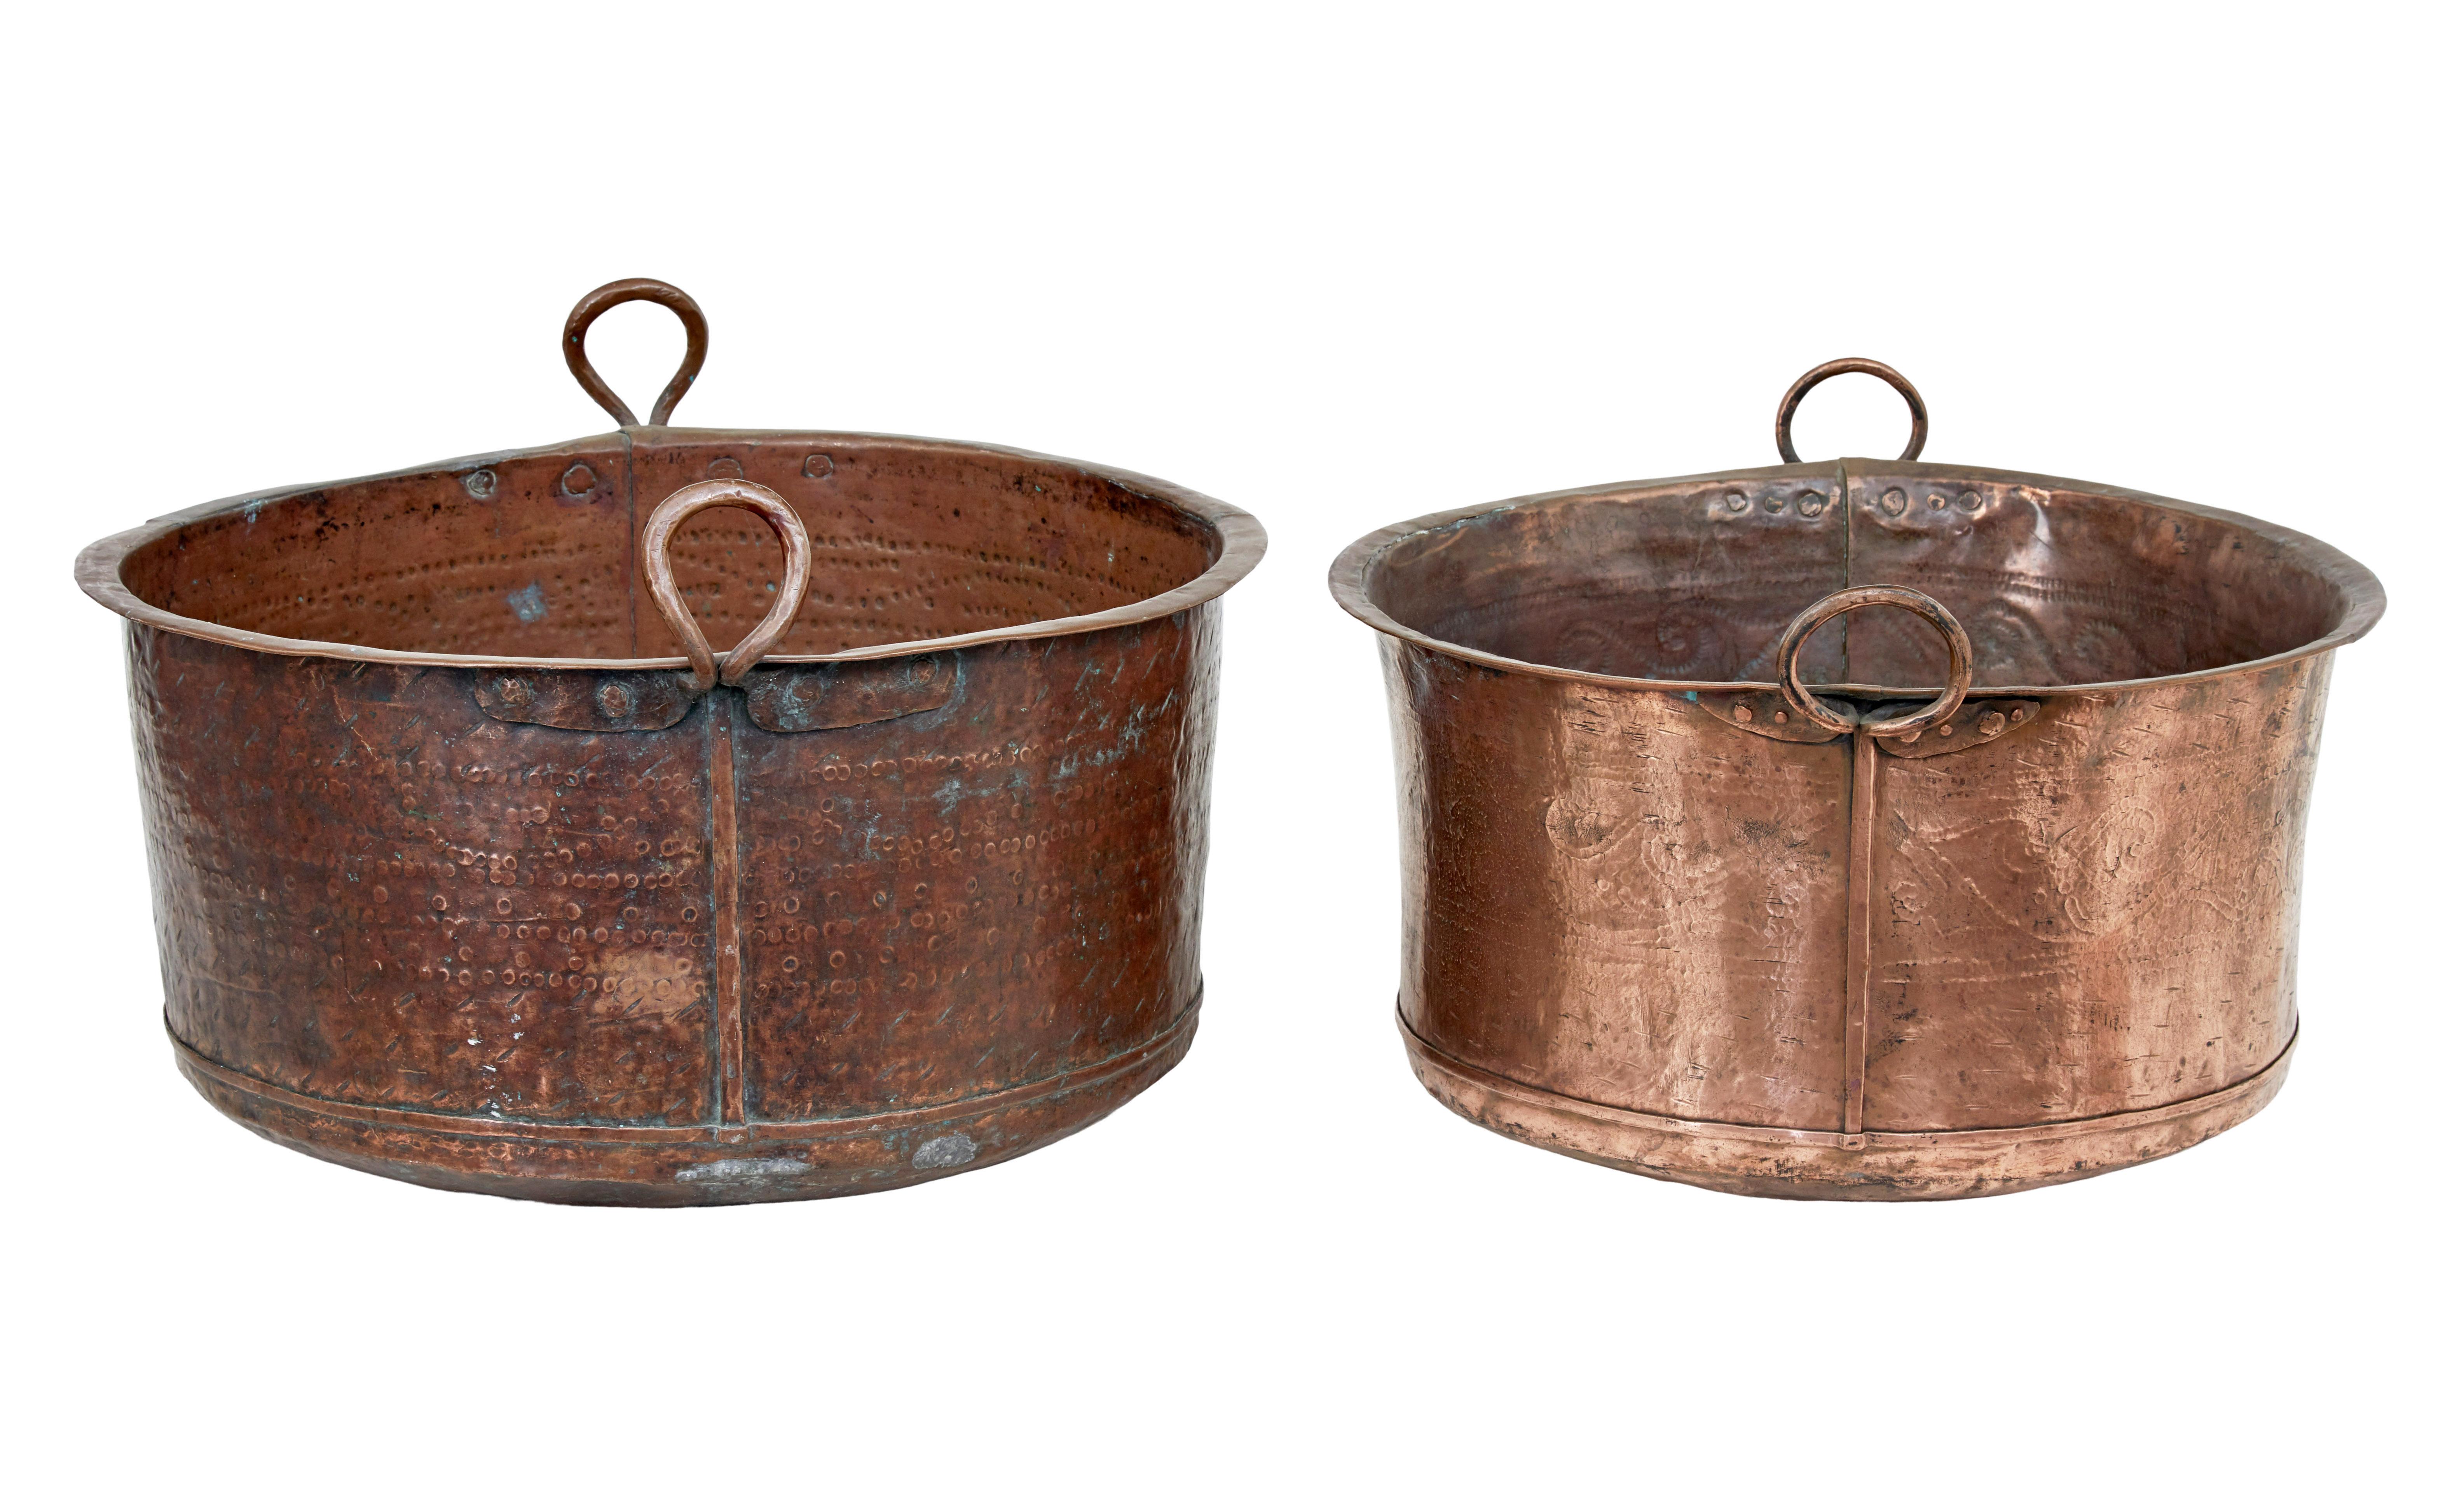 2 victorian large copper cooking vessels circa 1880.

Good quality each decorated with hand hammered designs, both fitted with looped handles.  Ideal for use and log/coal bins, or for decorative purposes.

Expected marks,staining and minor dings to